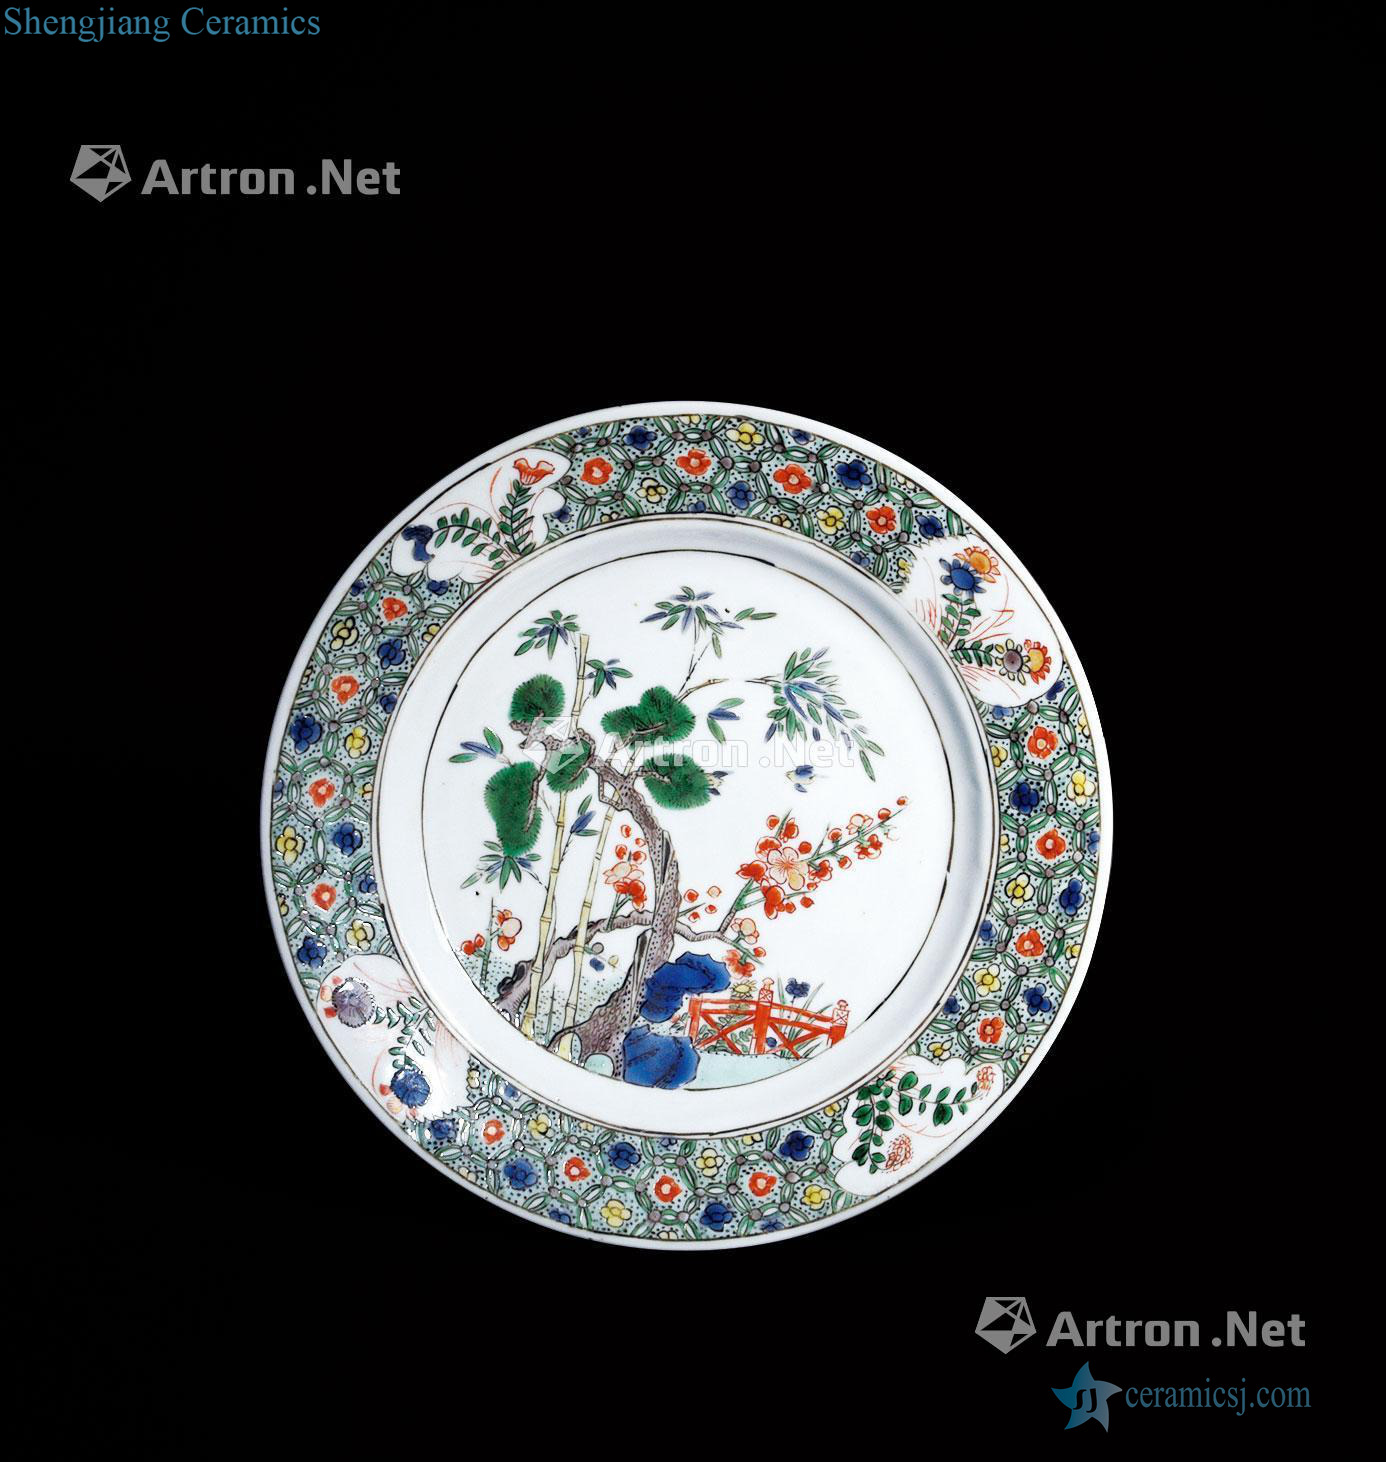 The qing emperor kangxi Age of colorful poetic plate